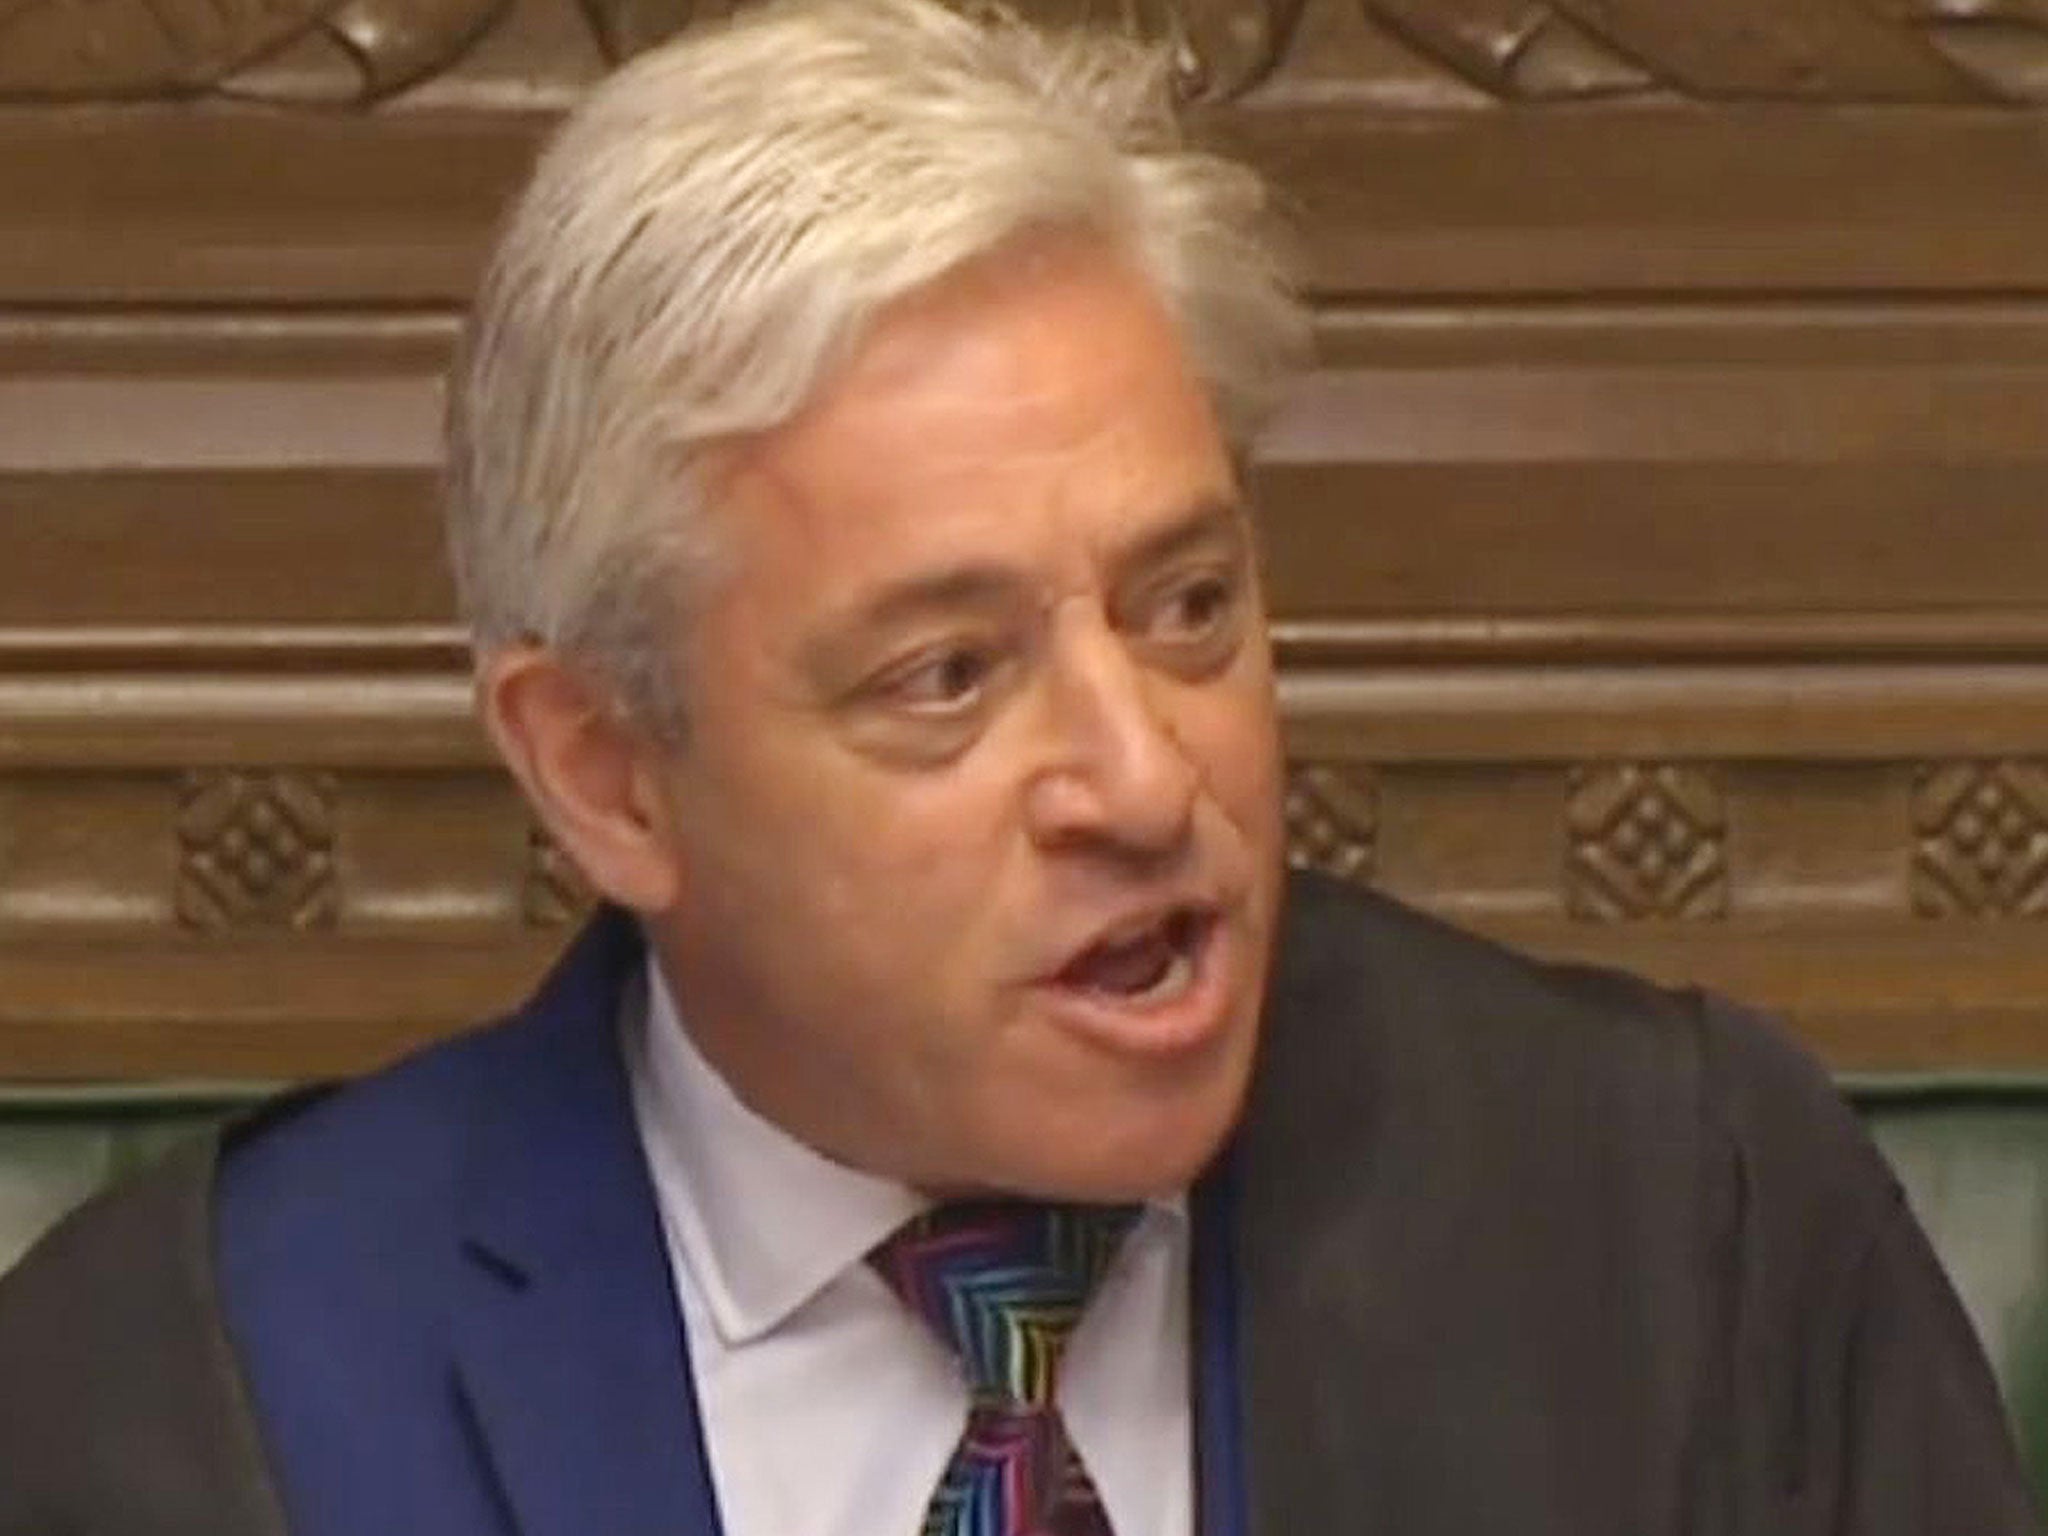 Mr Bercow is said to have berated House of Commons leader Andrea Leadsom